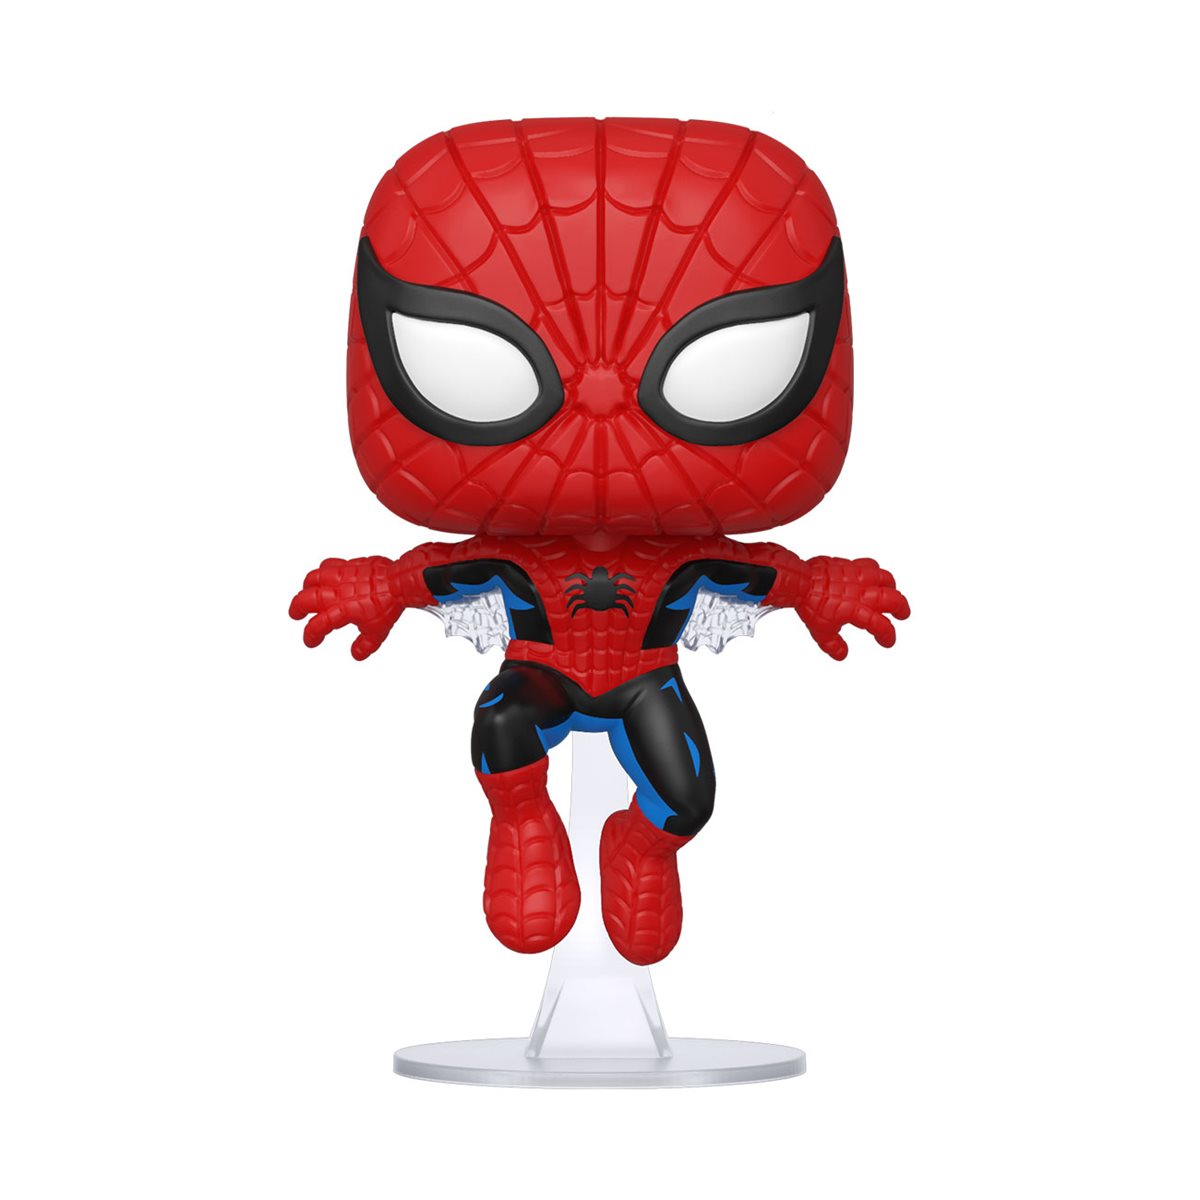 Funko Pop! Marvel 80th First Appearance Spider-Man Vinyl Figure # 593 with protector box